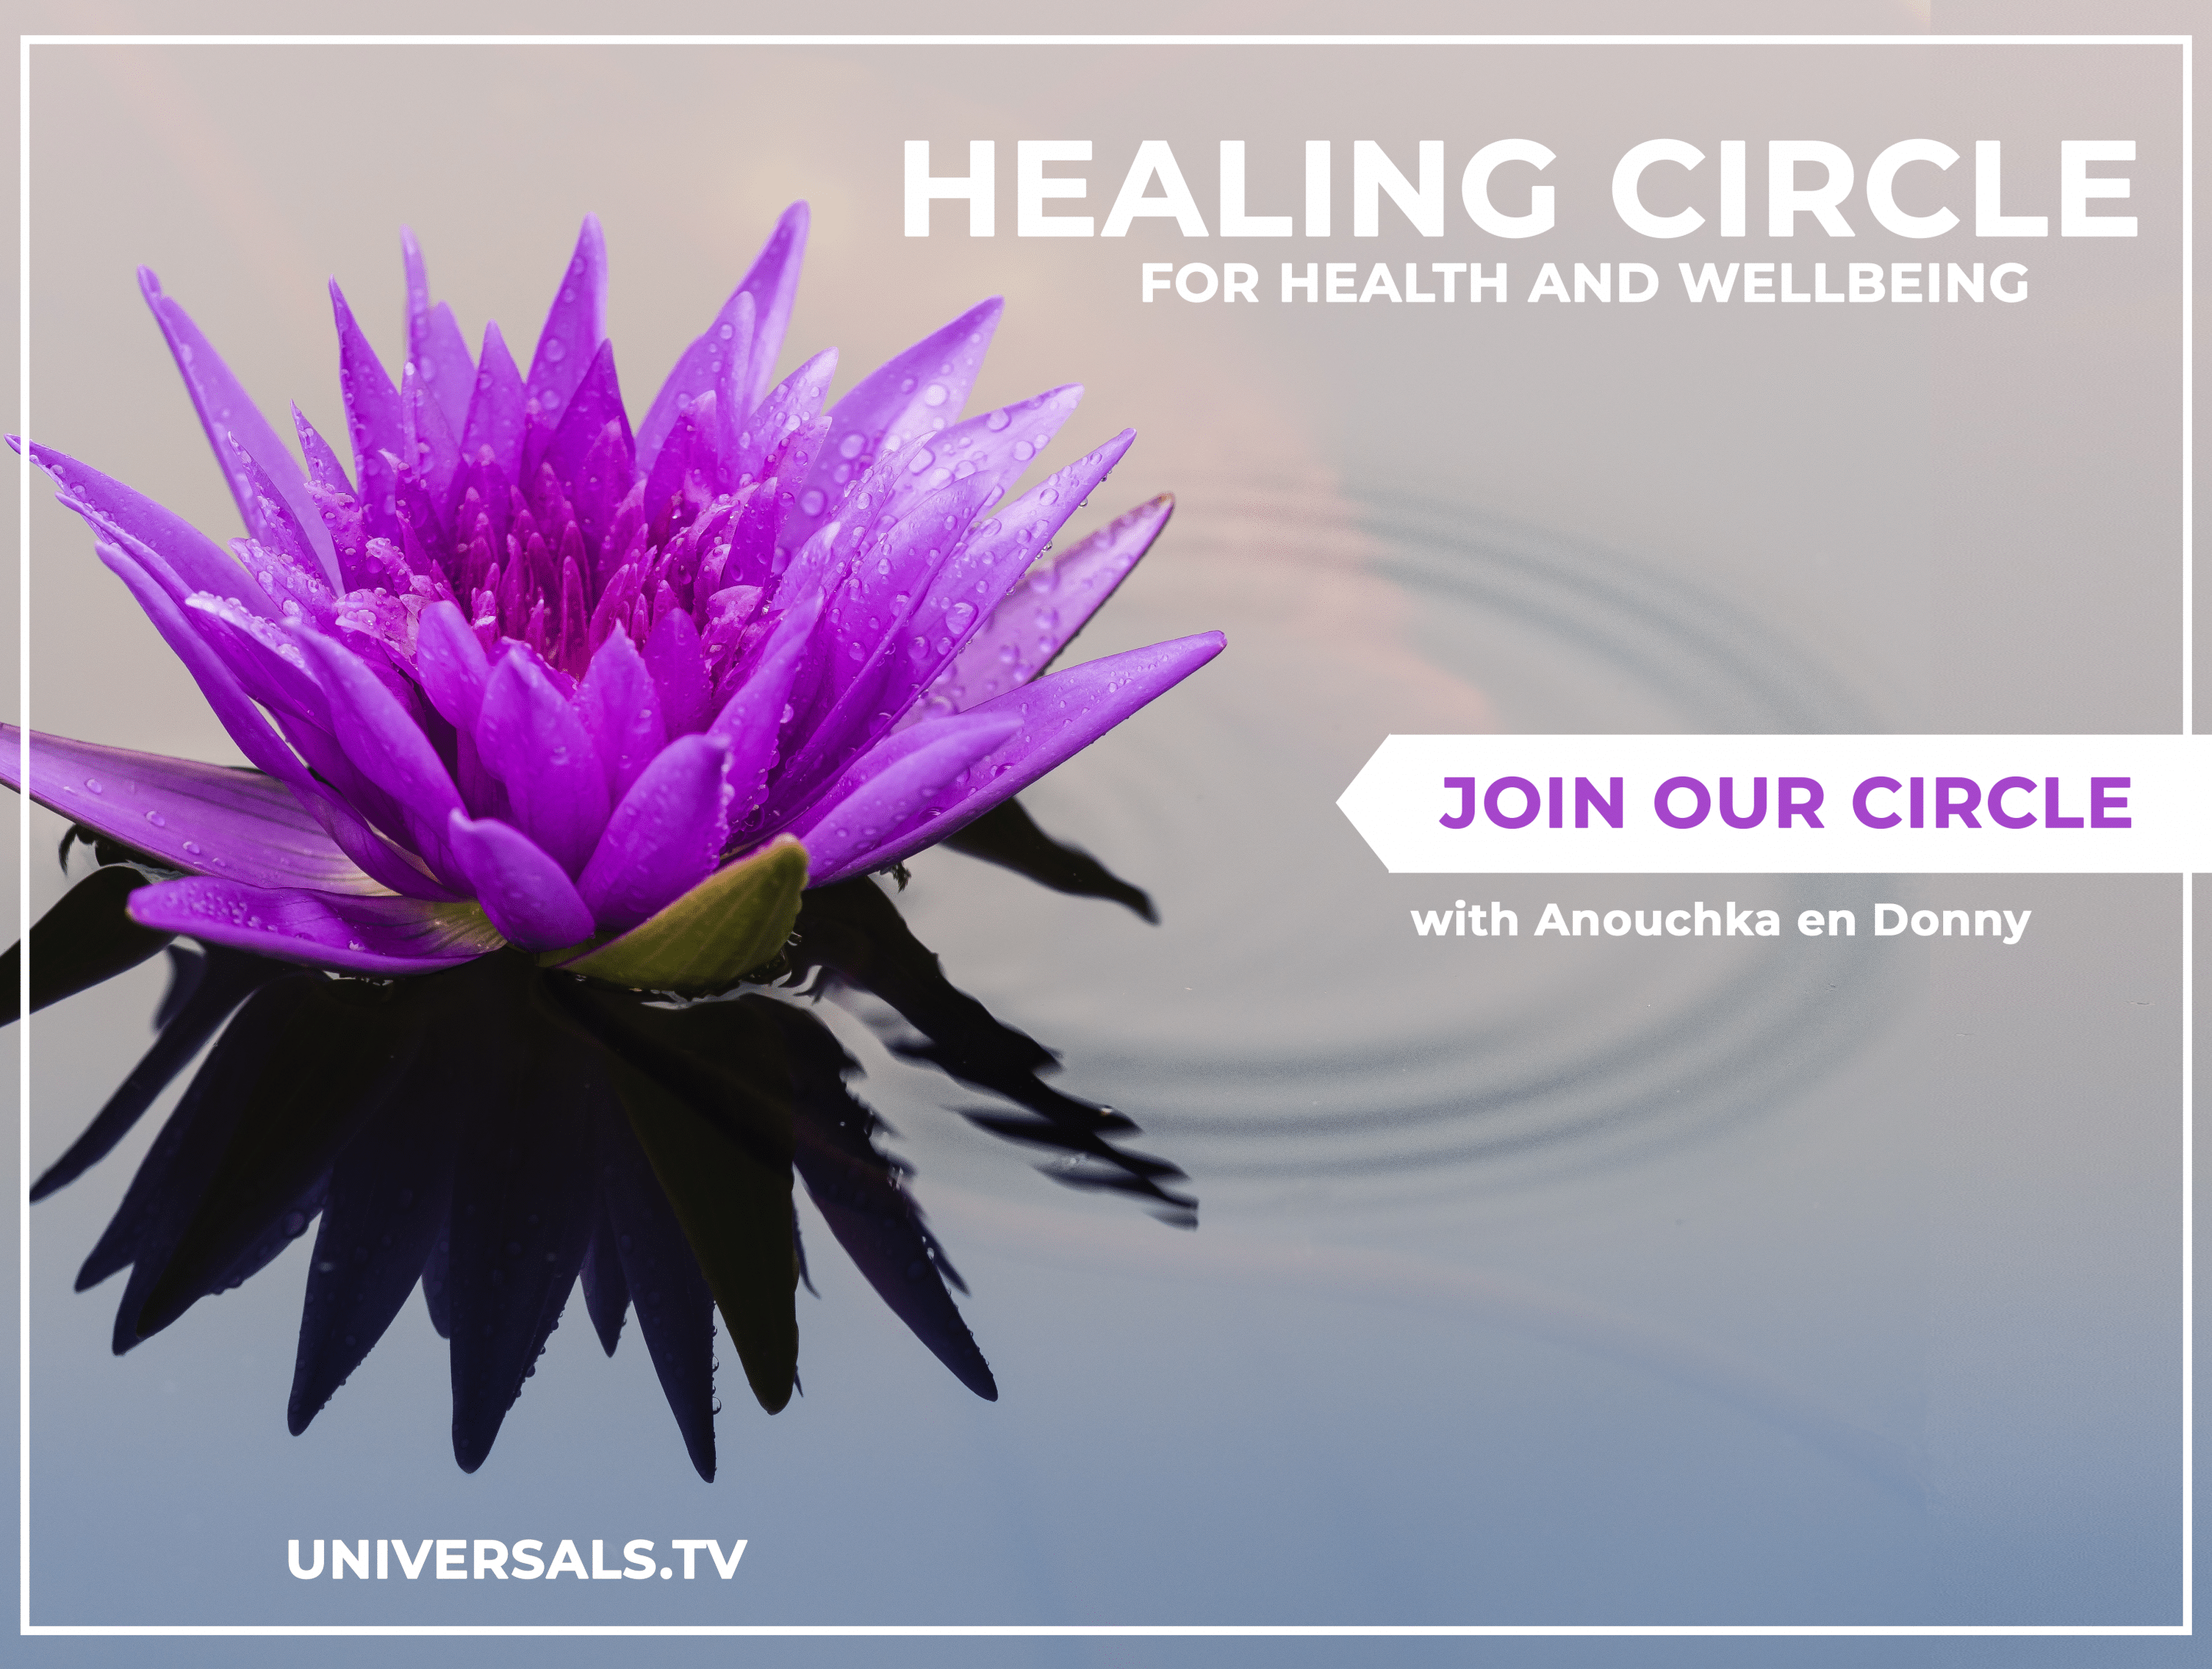 Healing Circle for Health and Wellbeing